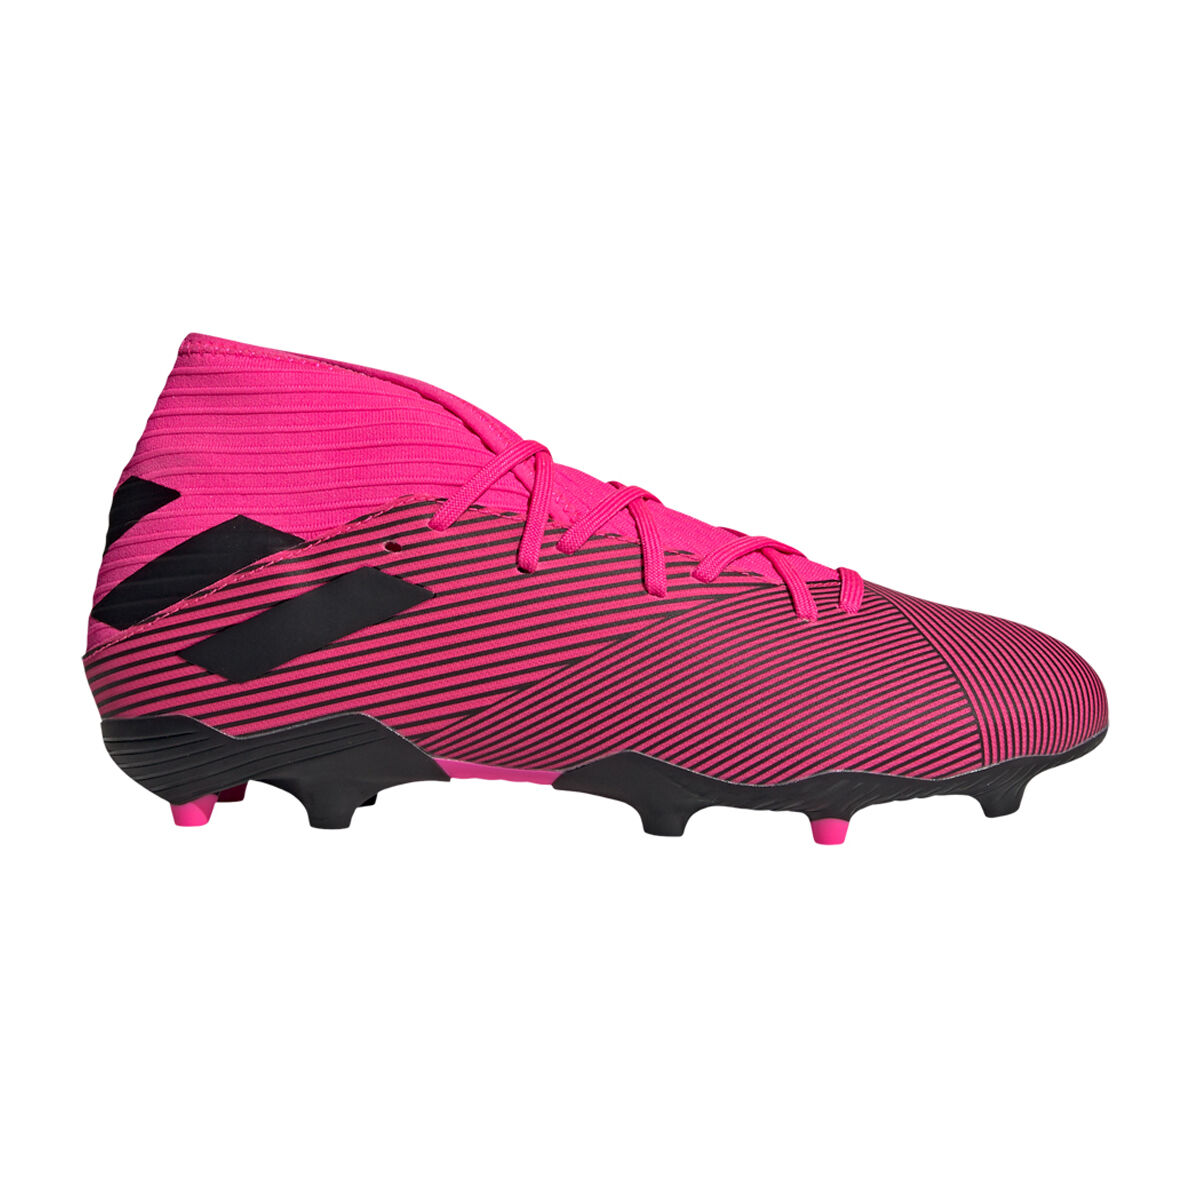 adidas pink soccer shoes